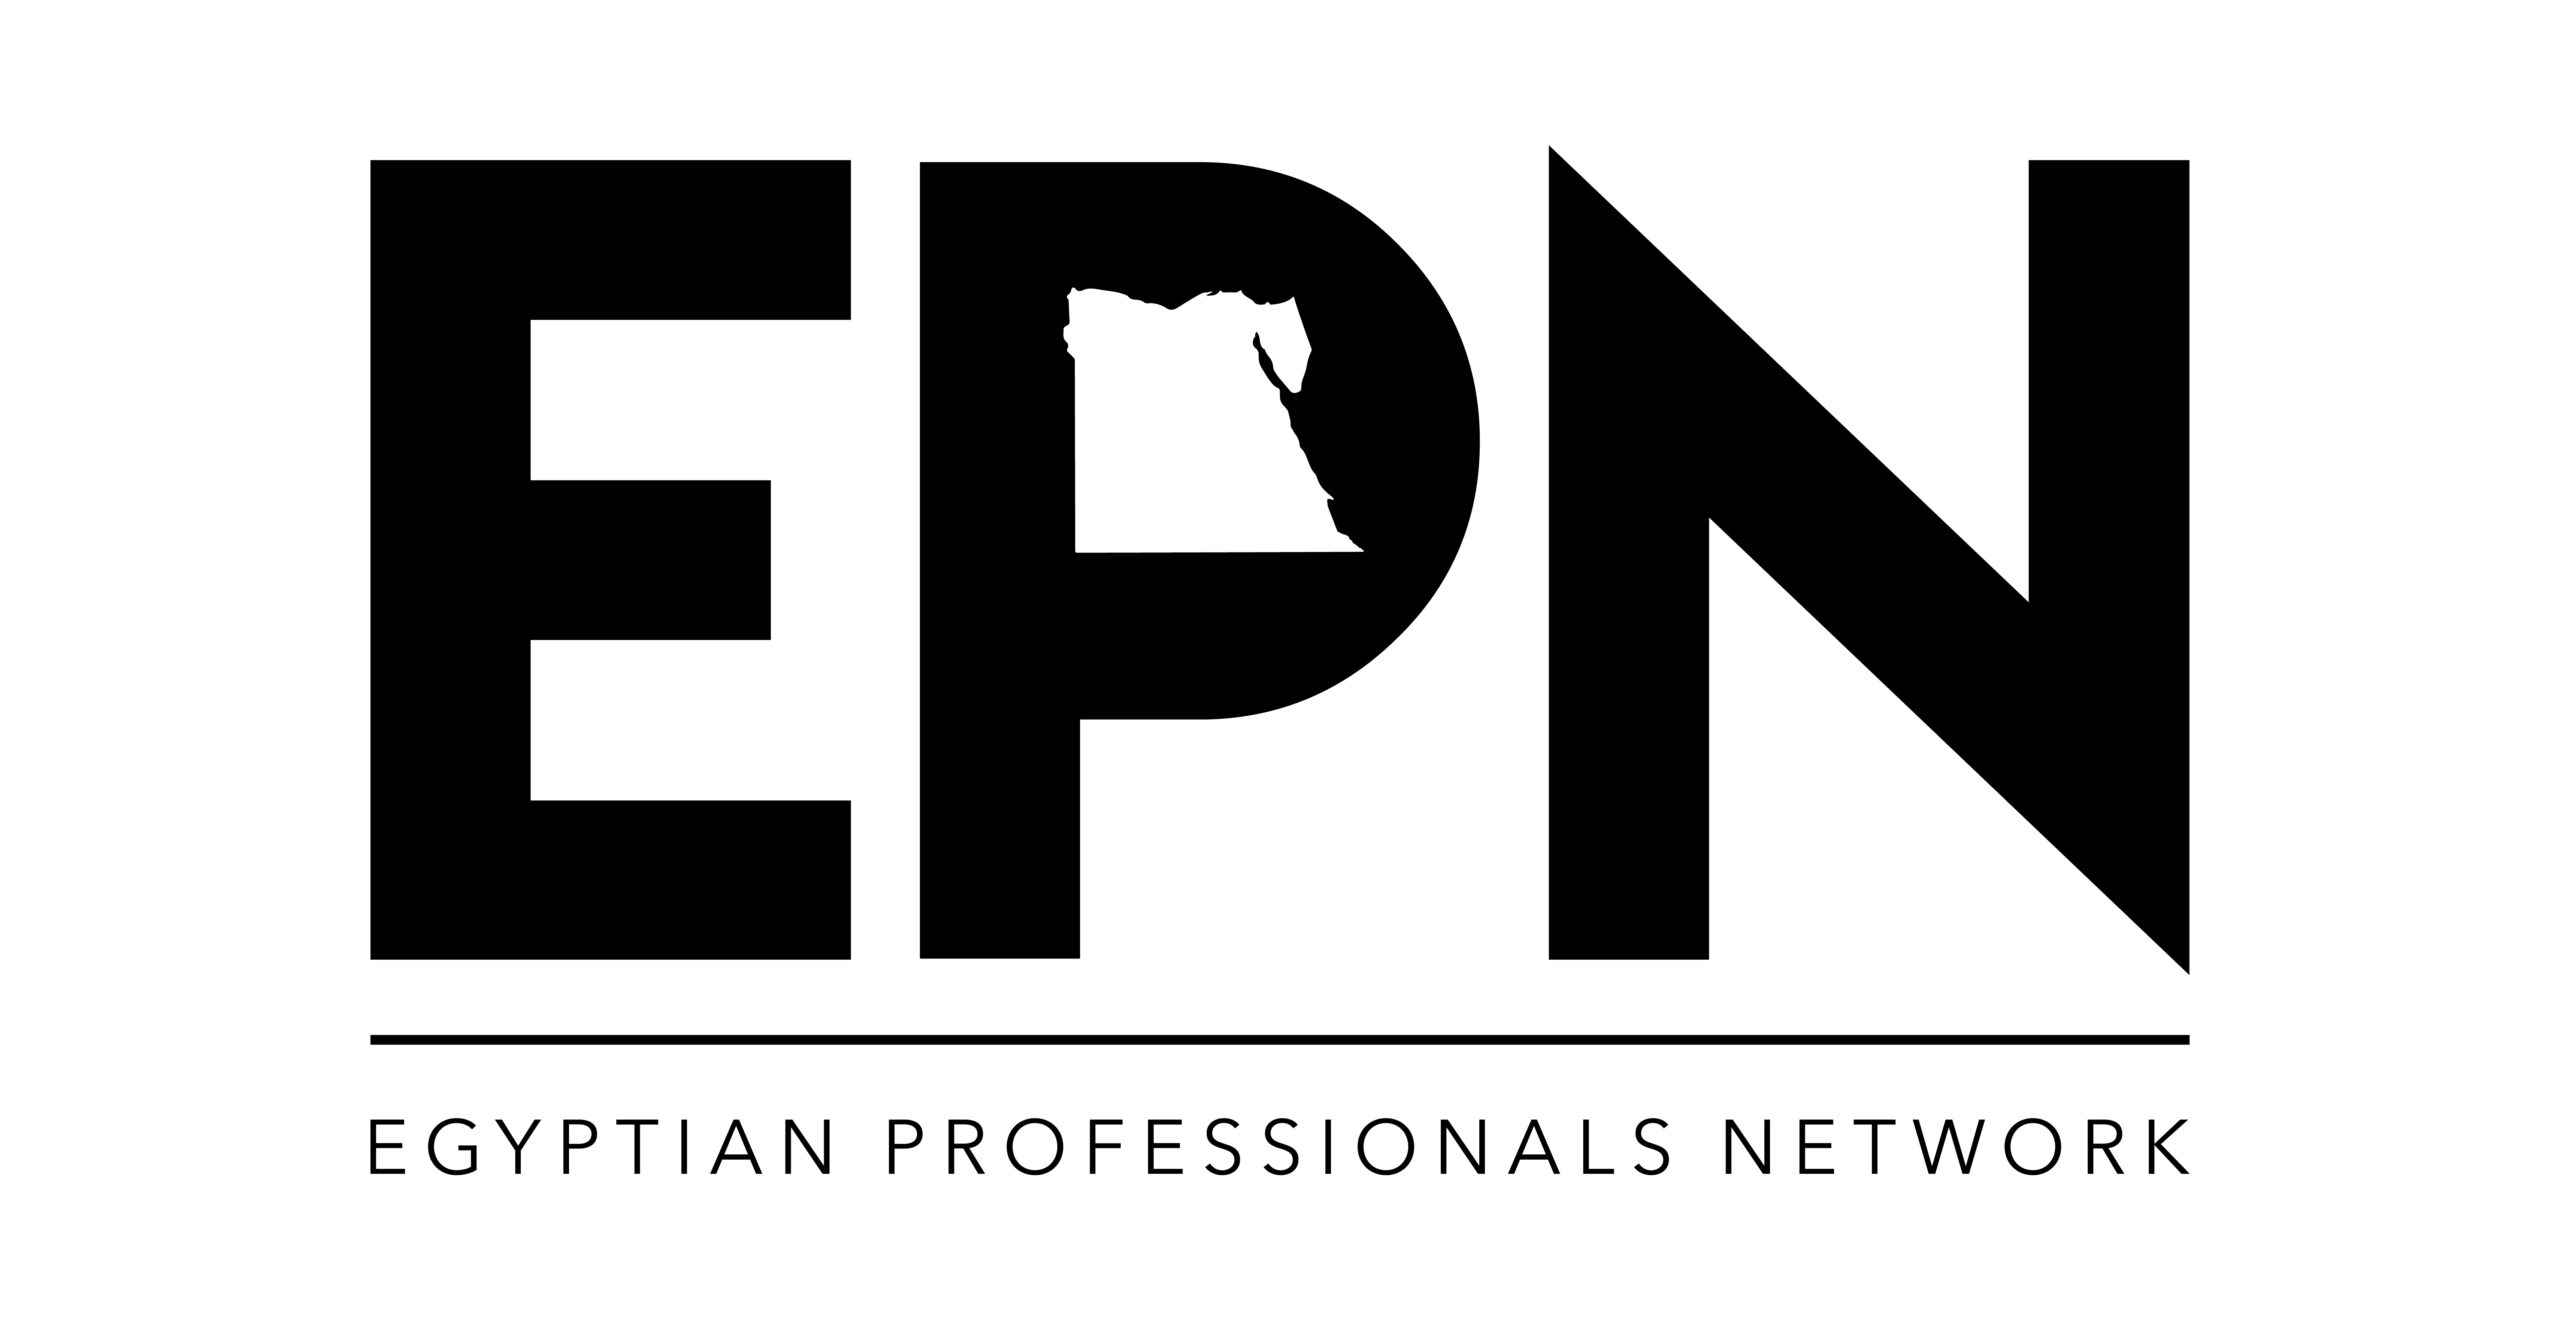 Egyptian Professionals Network (EPN) joins the Facebook Community Accelerator Program